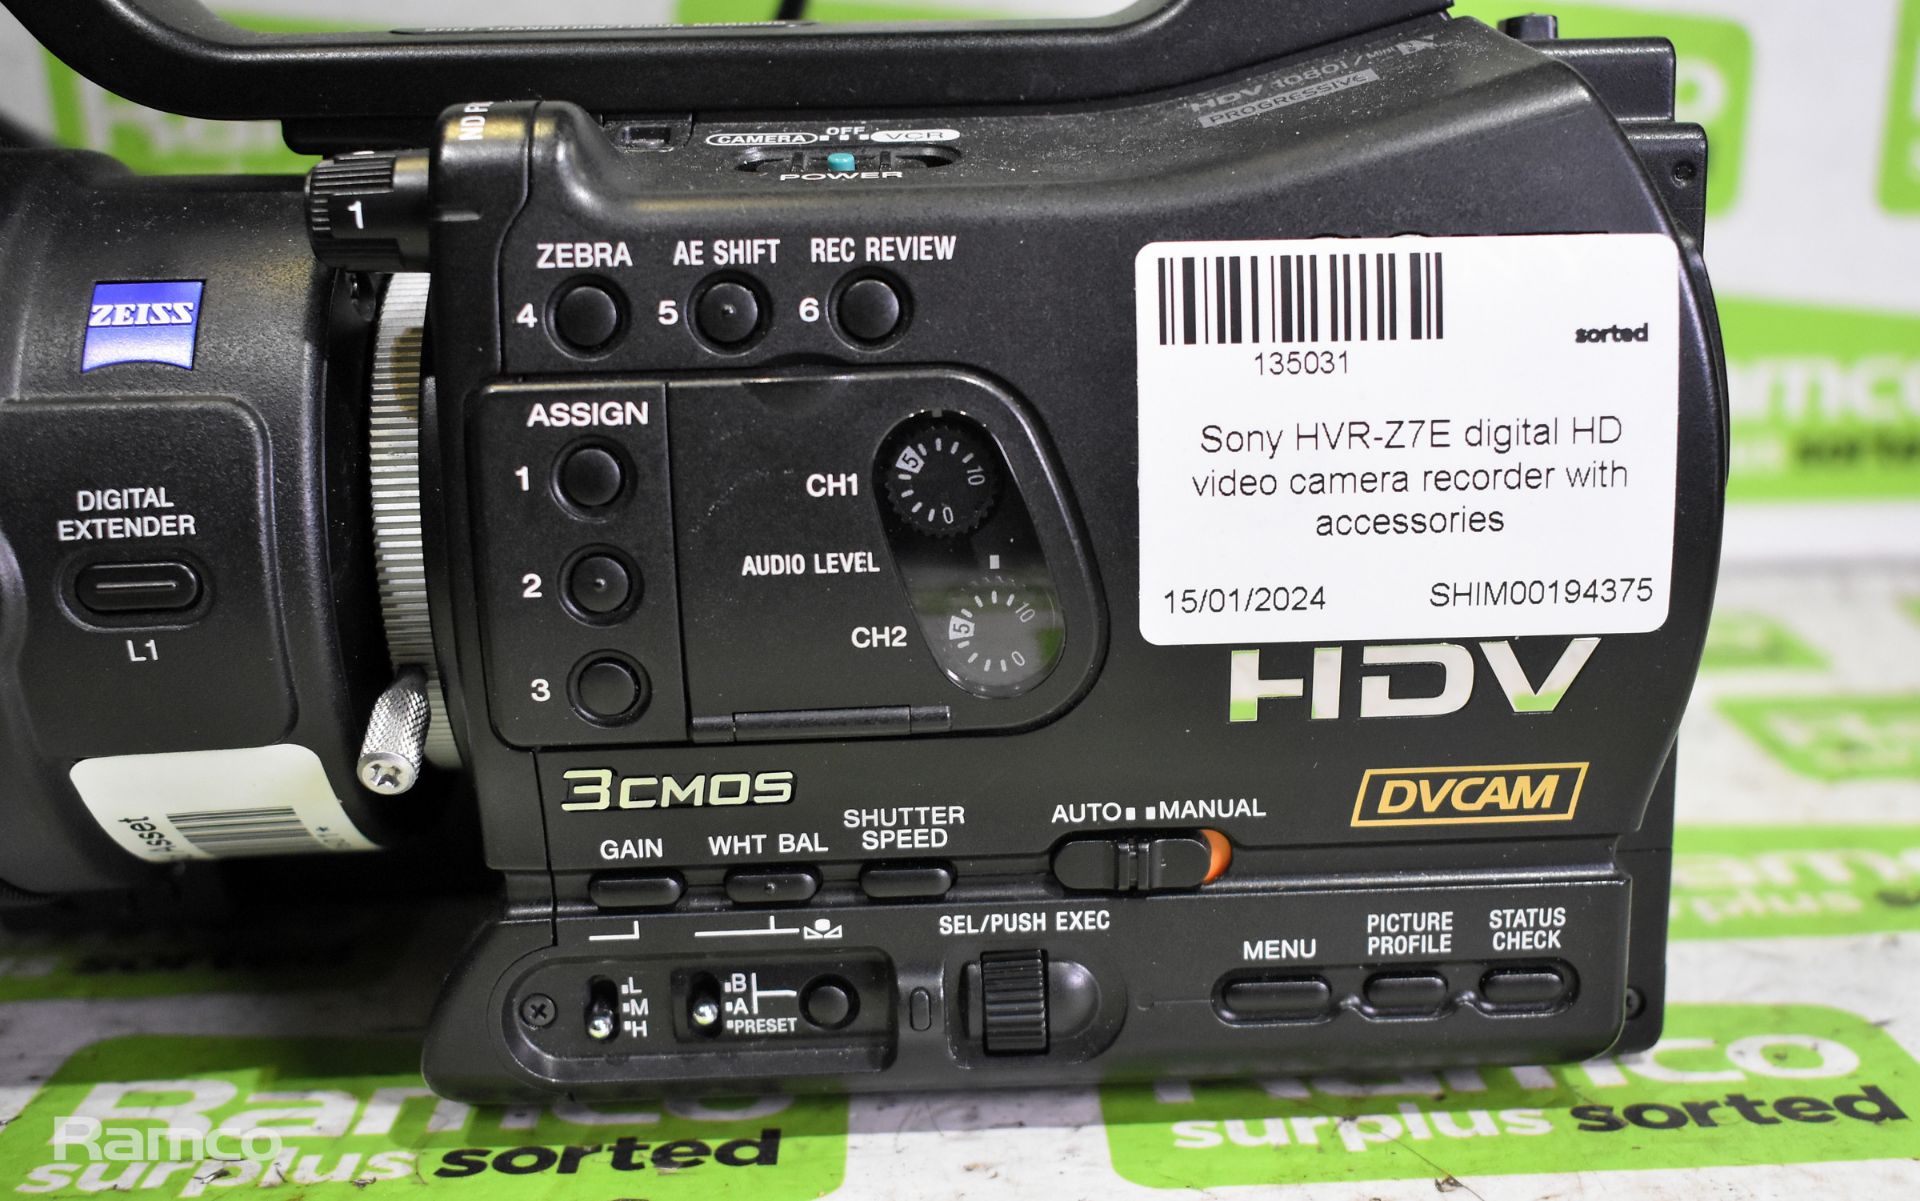 Sony HVR-Z7E digital HD video camera recorder with accessories - Image 3 of 12